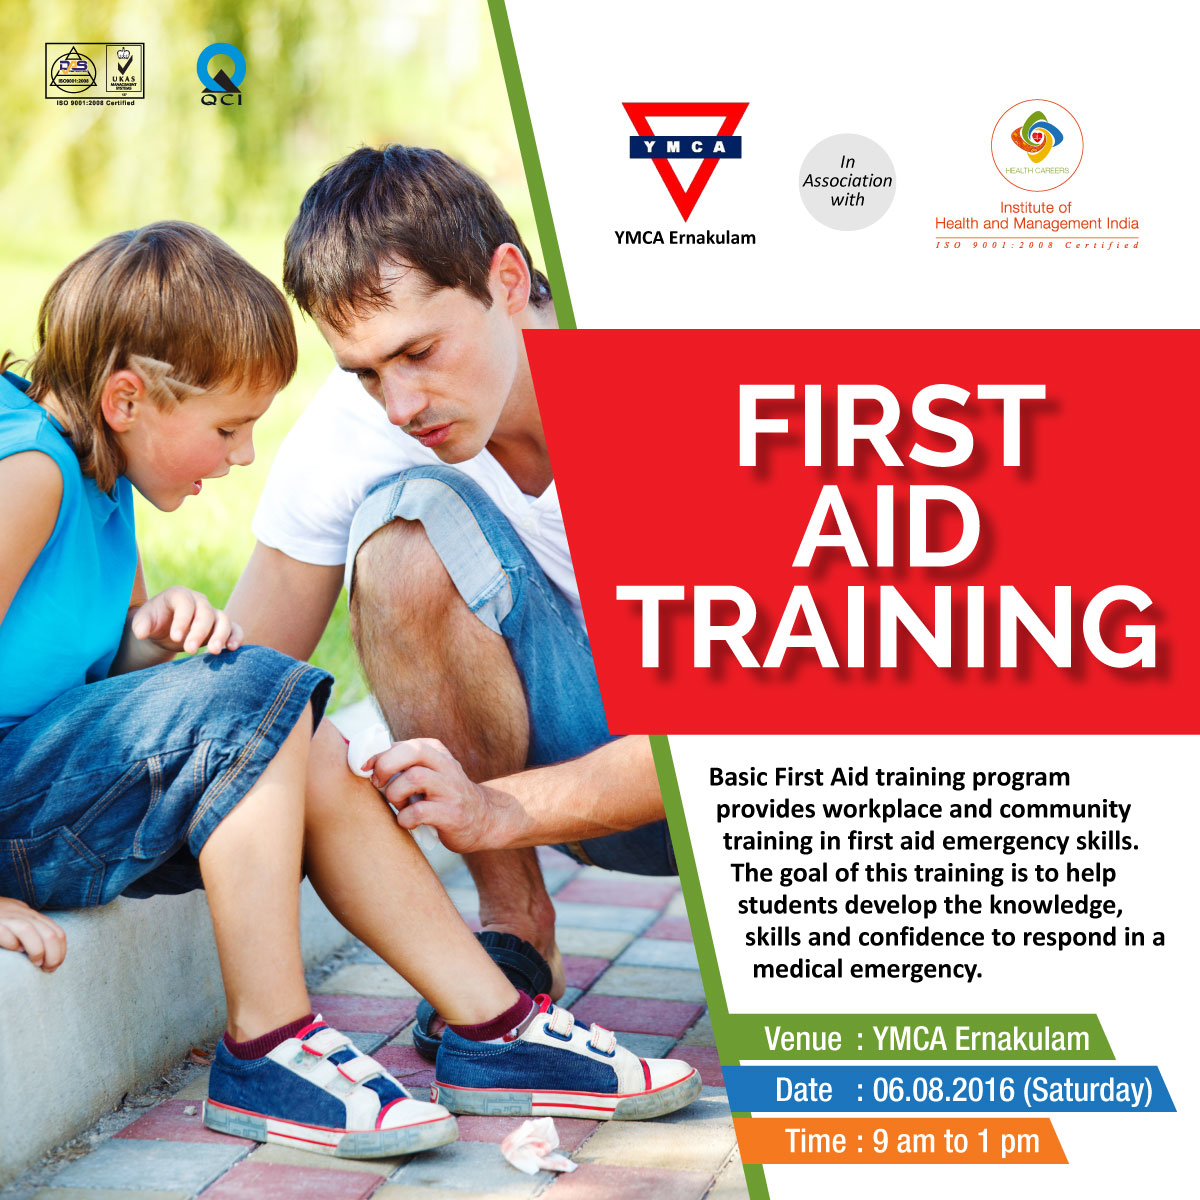 Get trained in first aid, save lives!